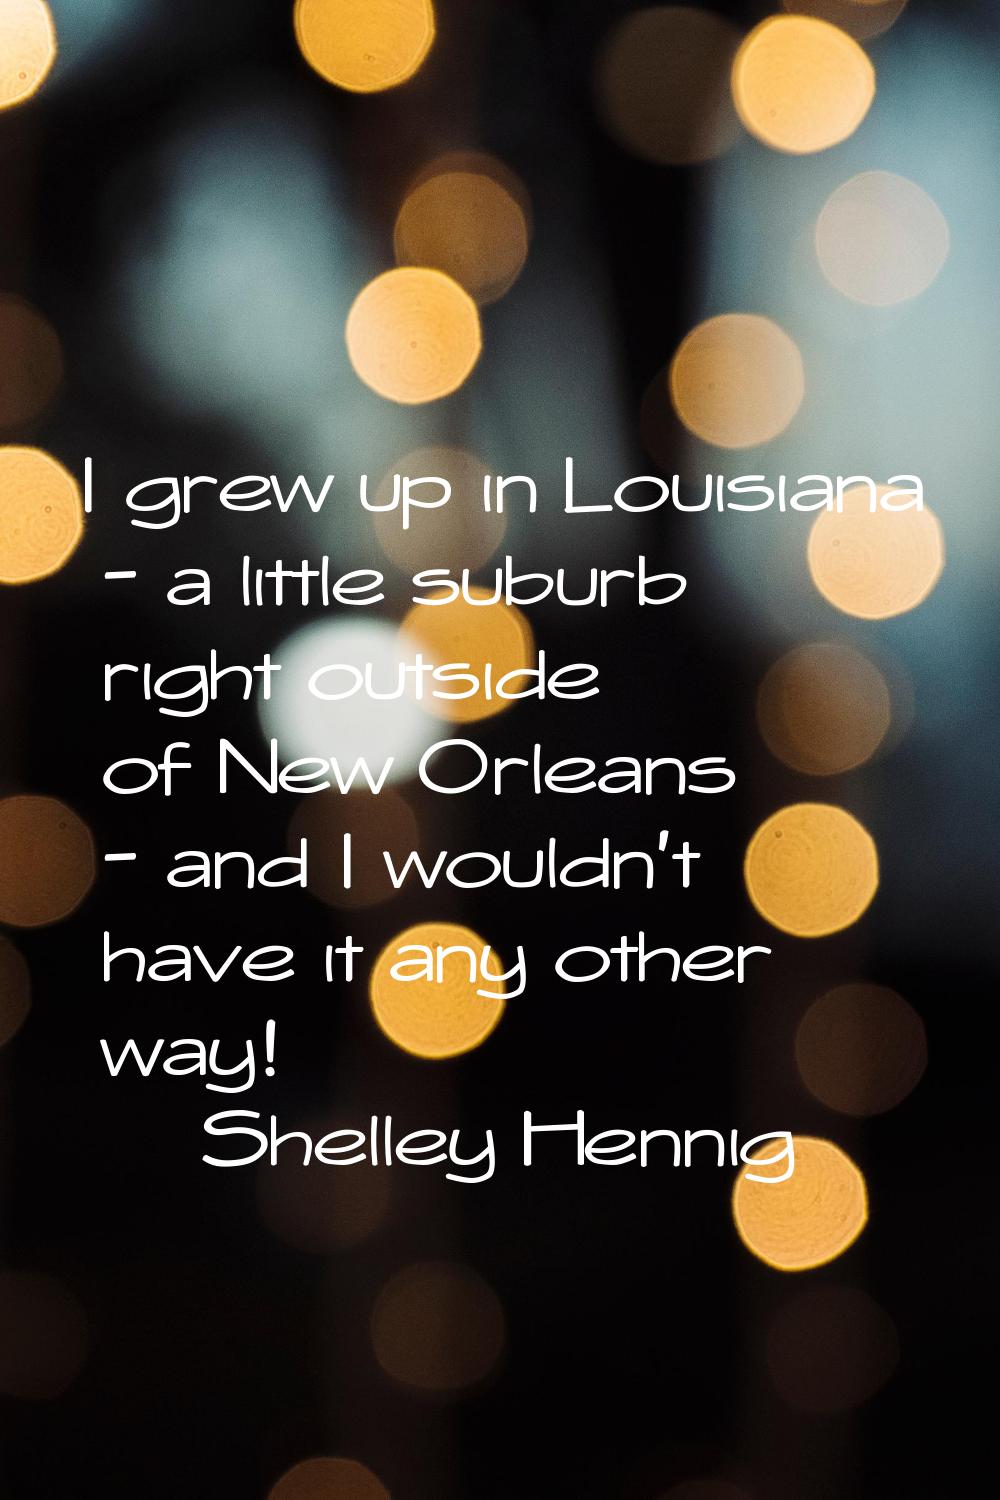 I grew up in Louisiana - a little suburb right outside of New Orleans - and I wouldn't have it any 